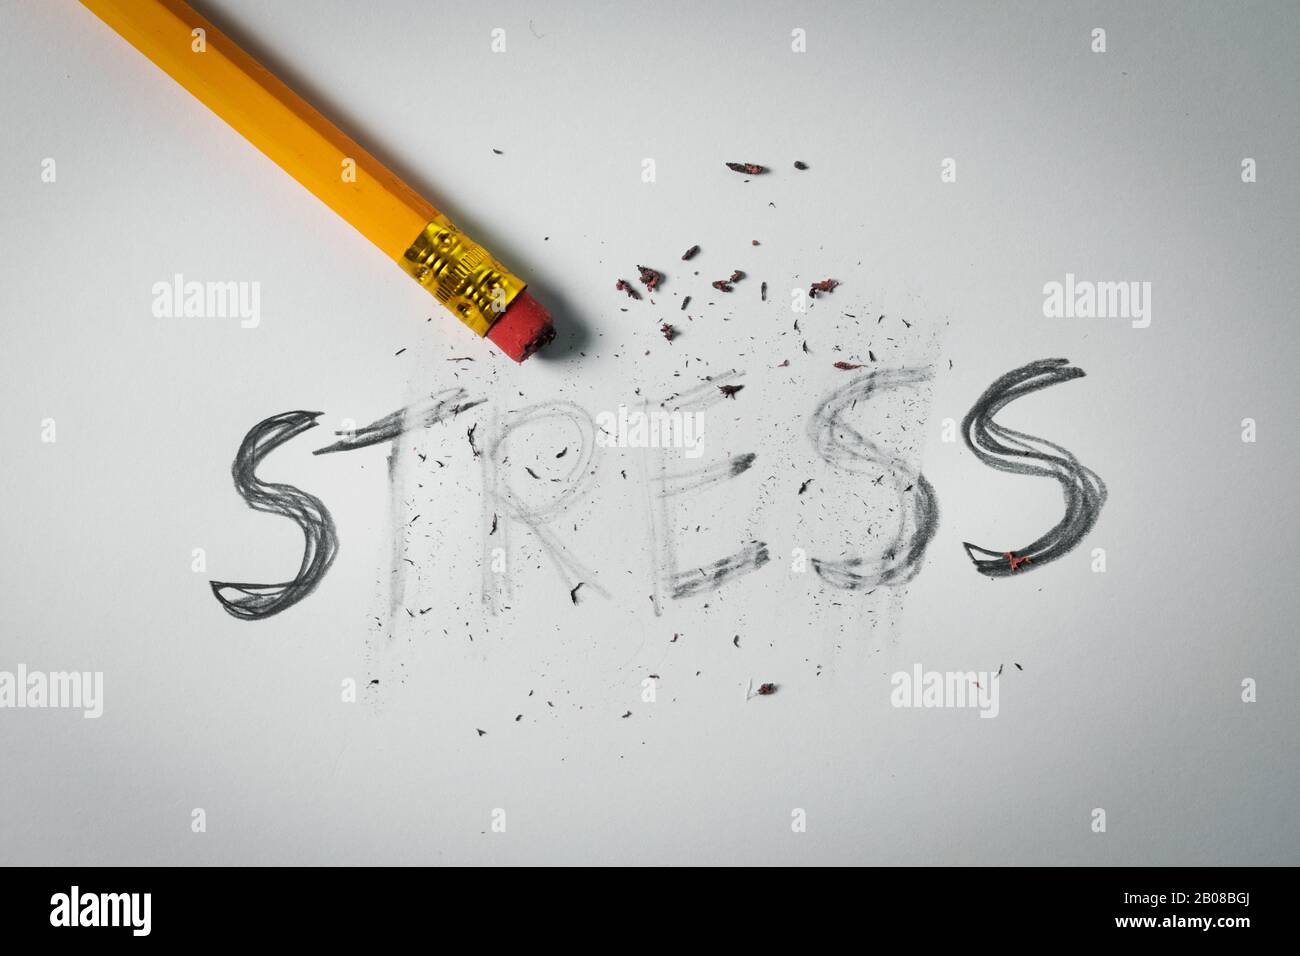 stress relief and management concept Stock Photo